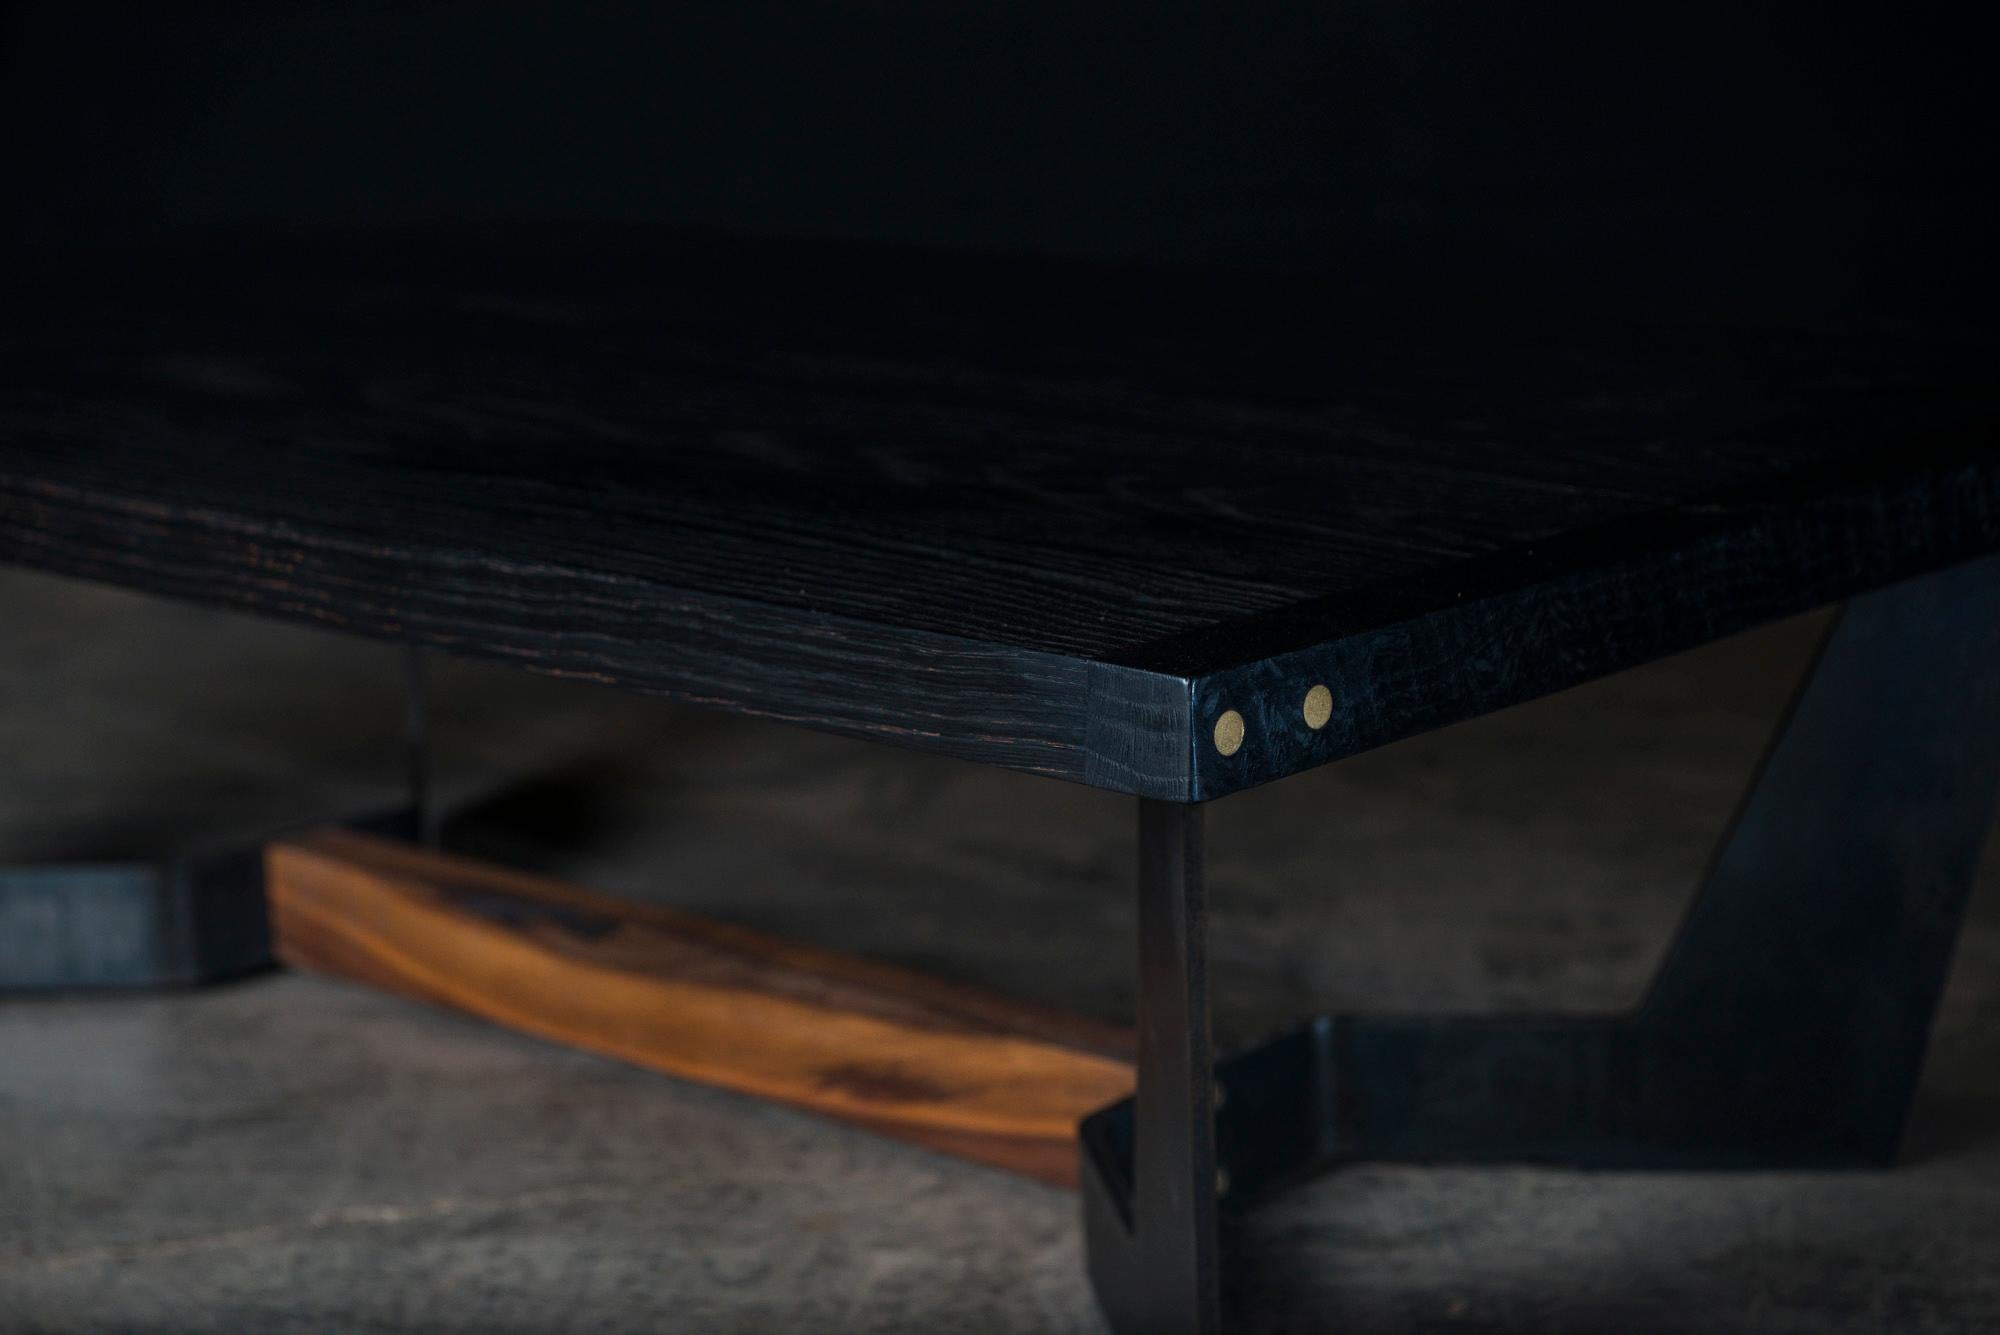 The Franklin center table is handmade from a thick solid wood surface & featured subtitle hand polished brass details at the end. It has a hand rubbed natural oil and wax finish that enhance the real beauty of the wood and give a natural warm touch.